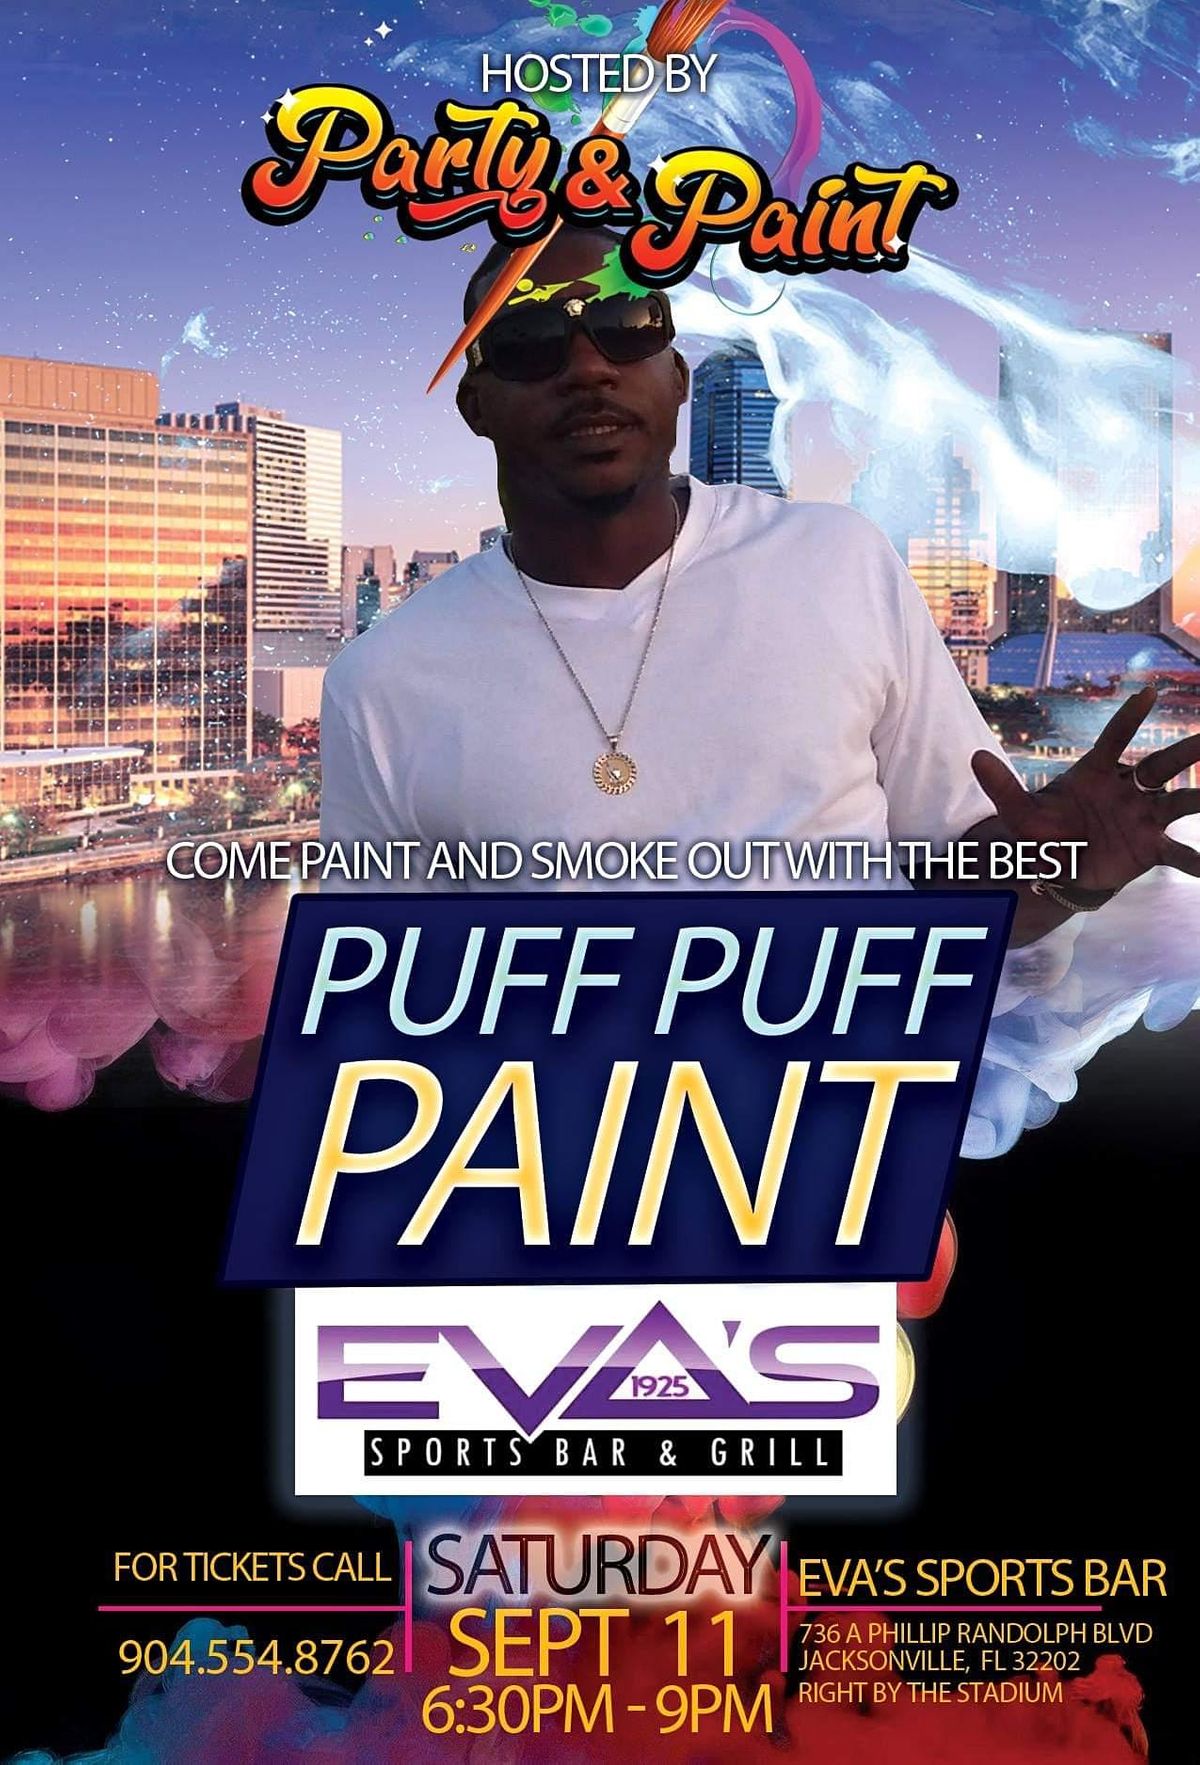 Puff Puff Paint  "Hosted by Party &Paint